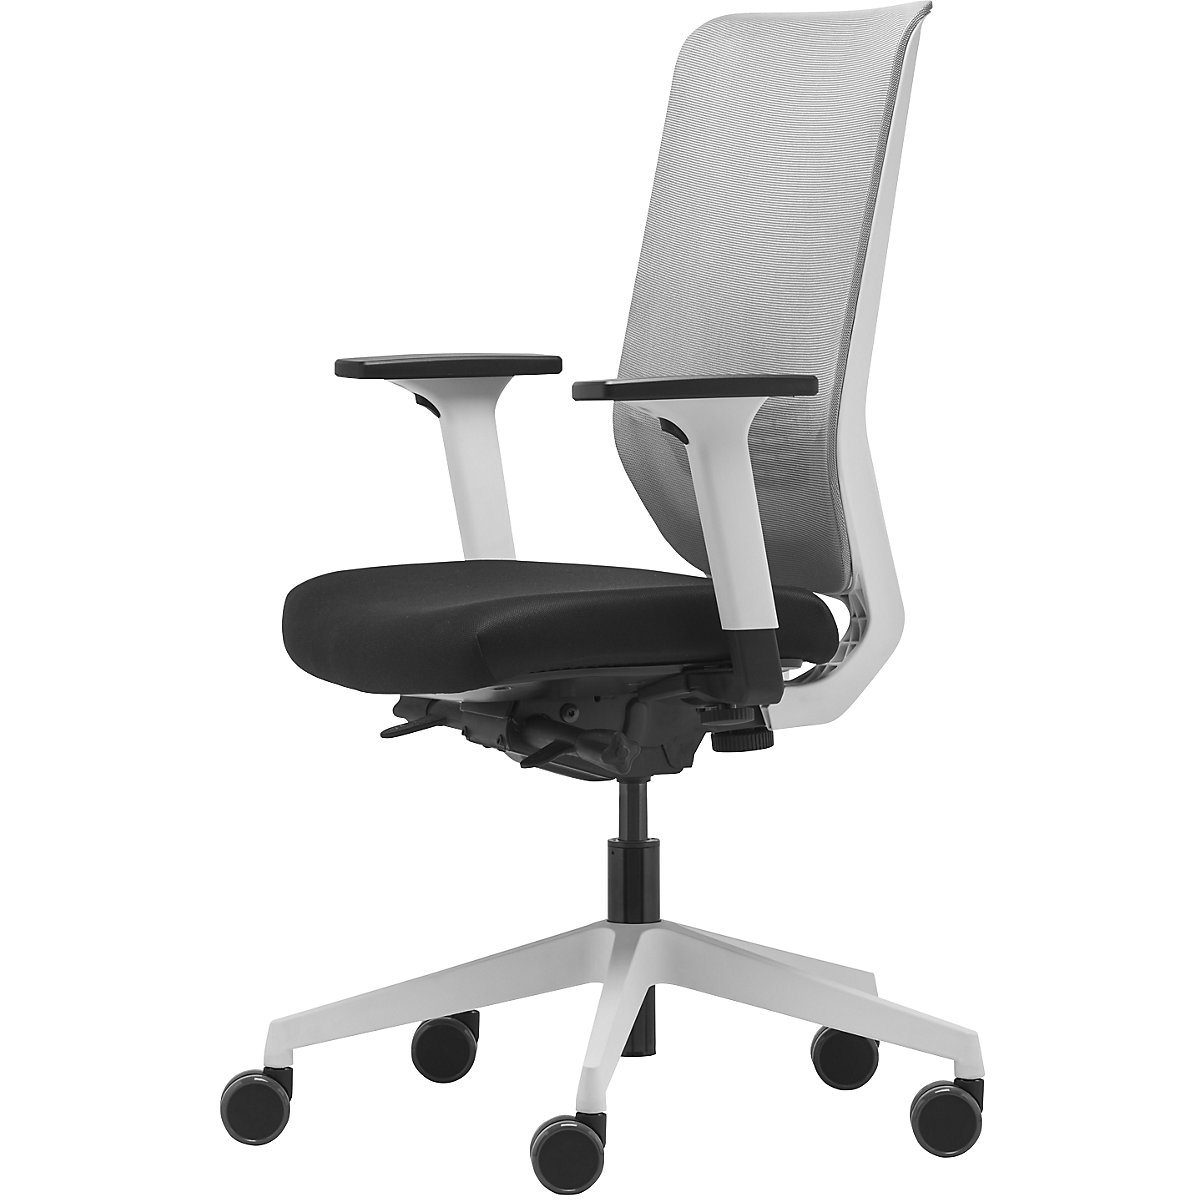 TO-SYNC PRO office swivel chair – TrendOffice